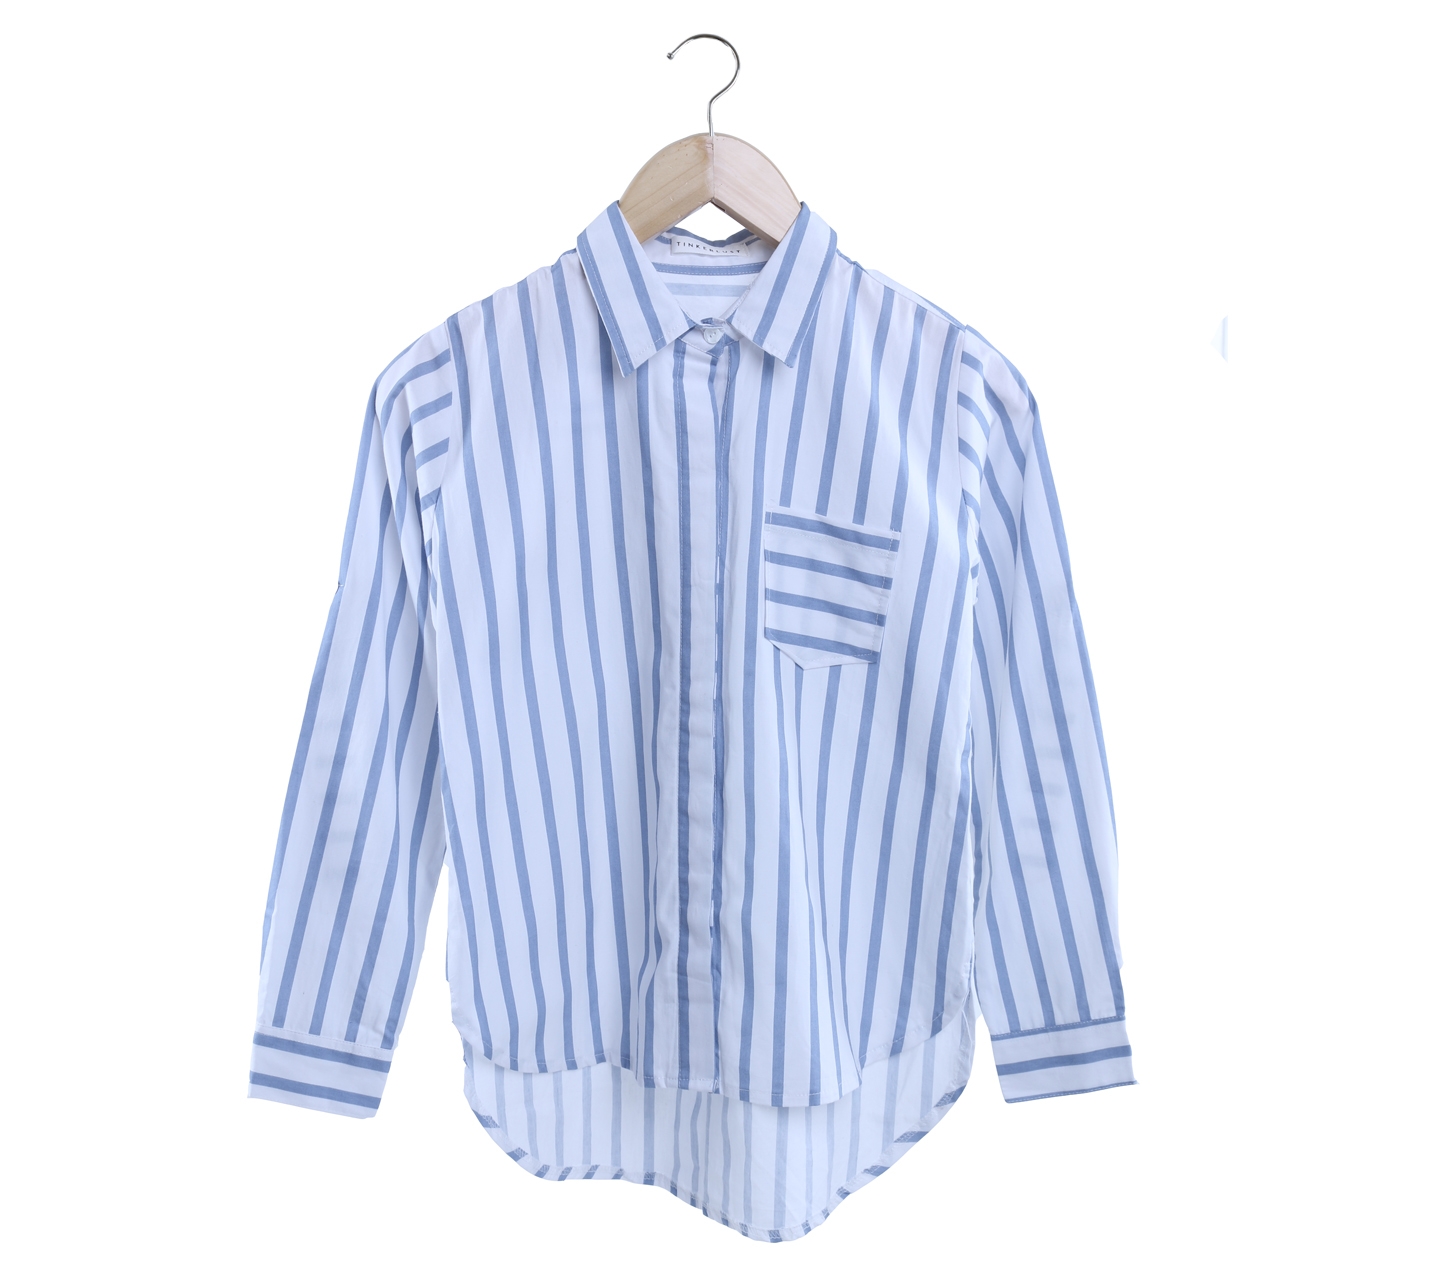 Tinkerlust White And Blue Striped Shirt